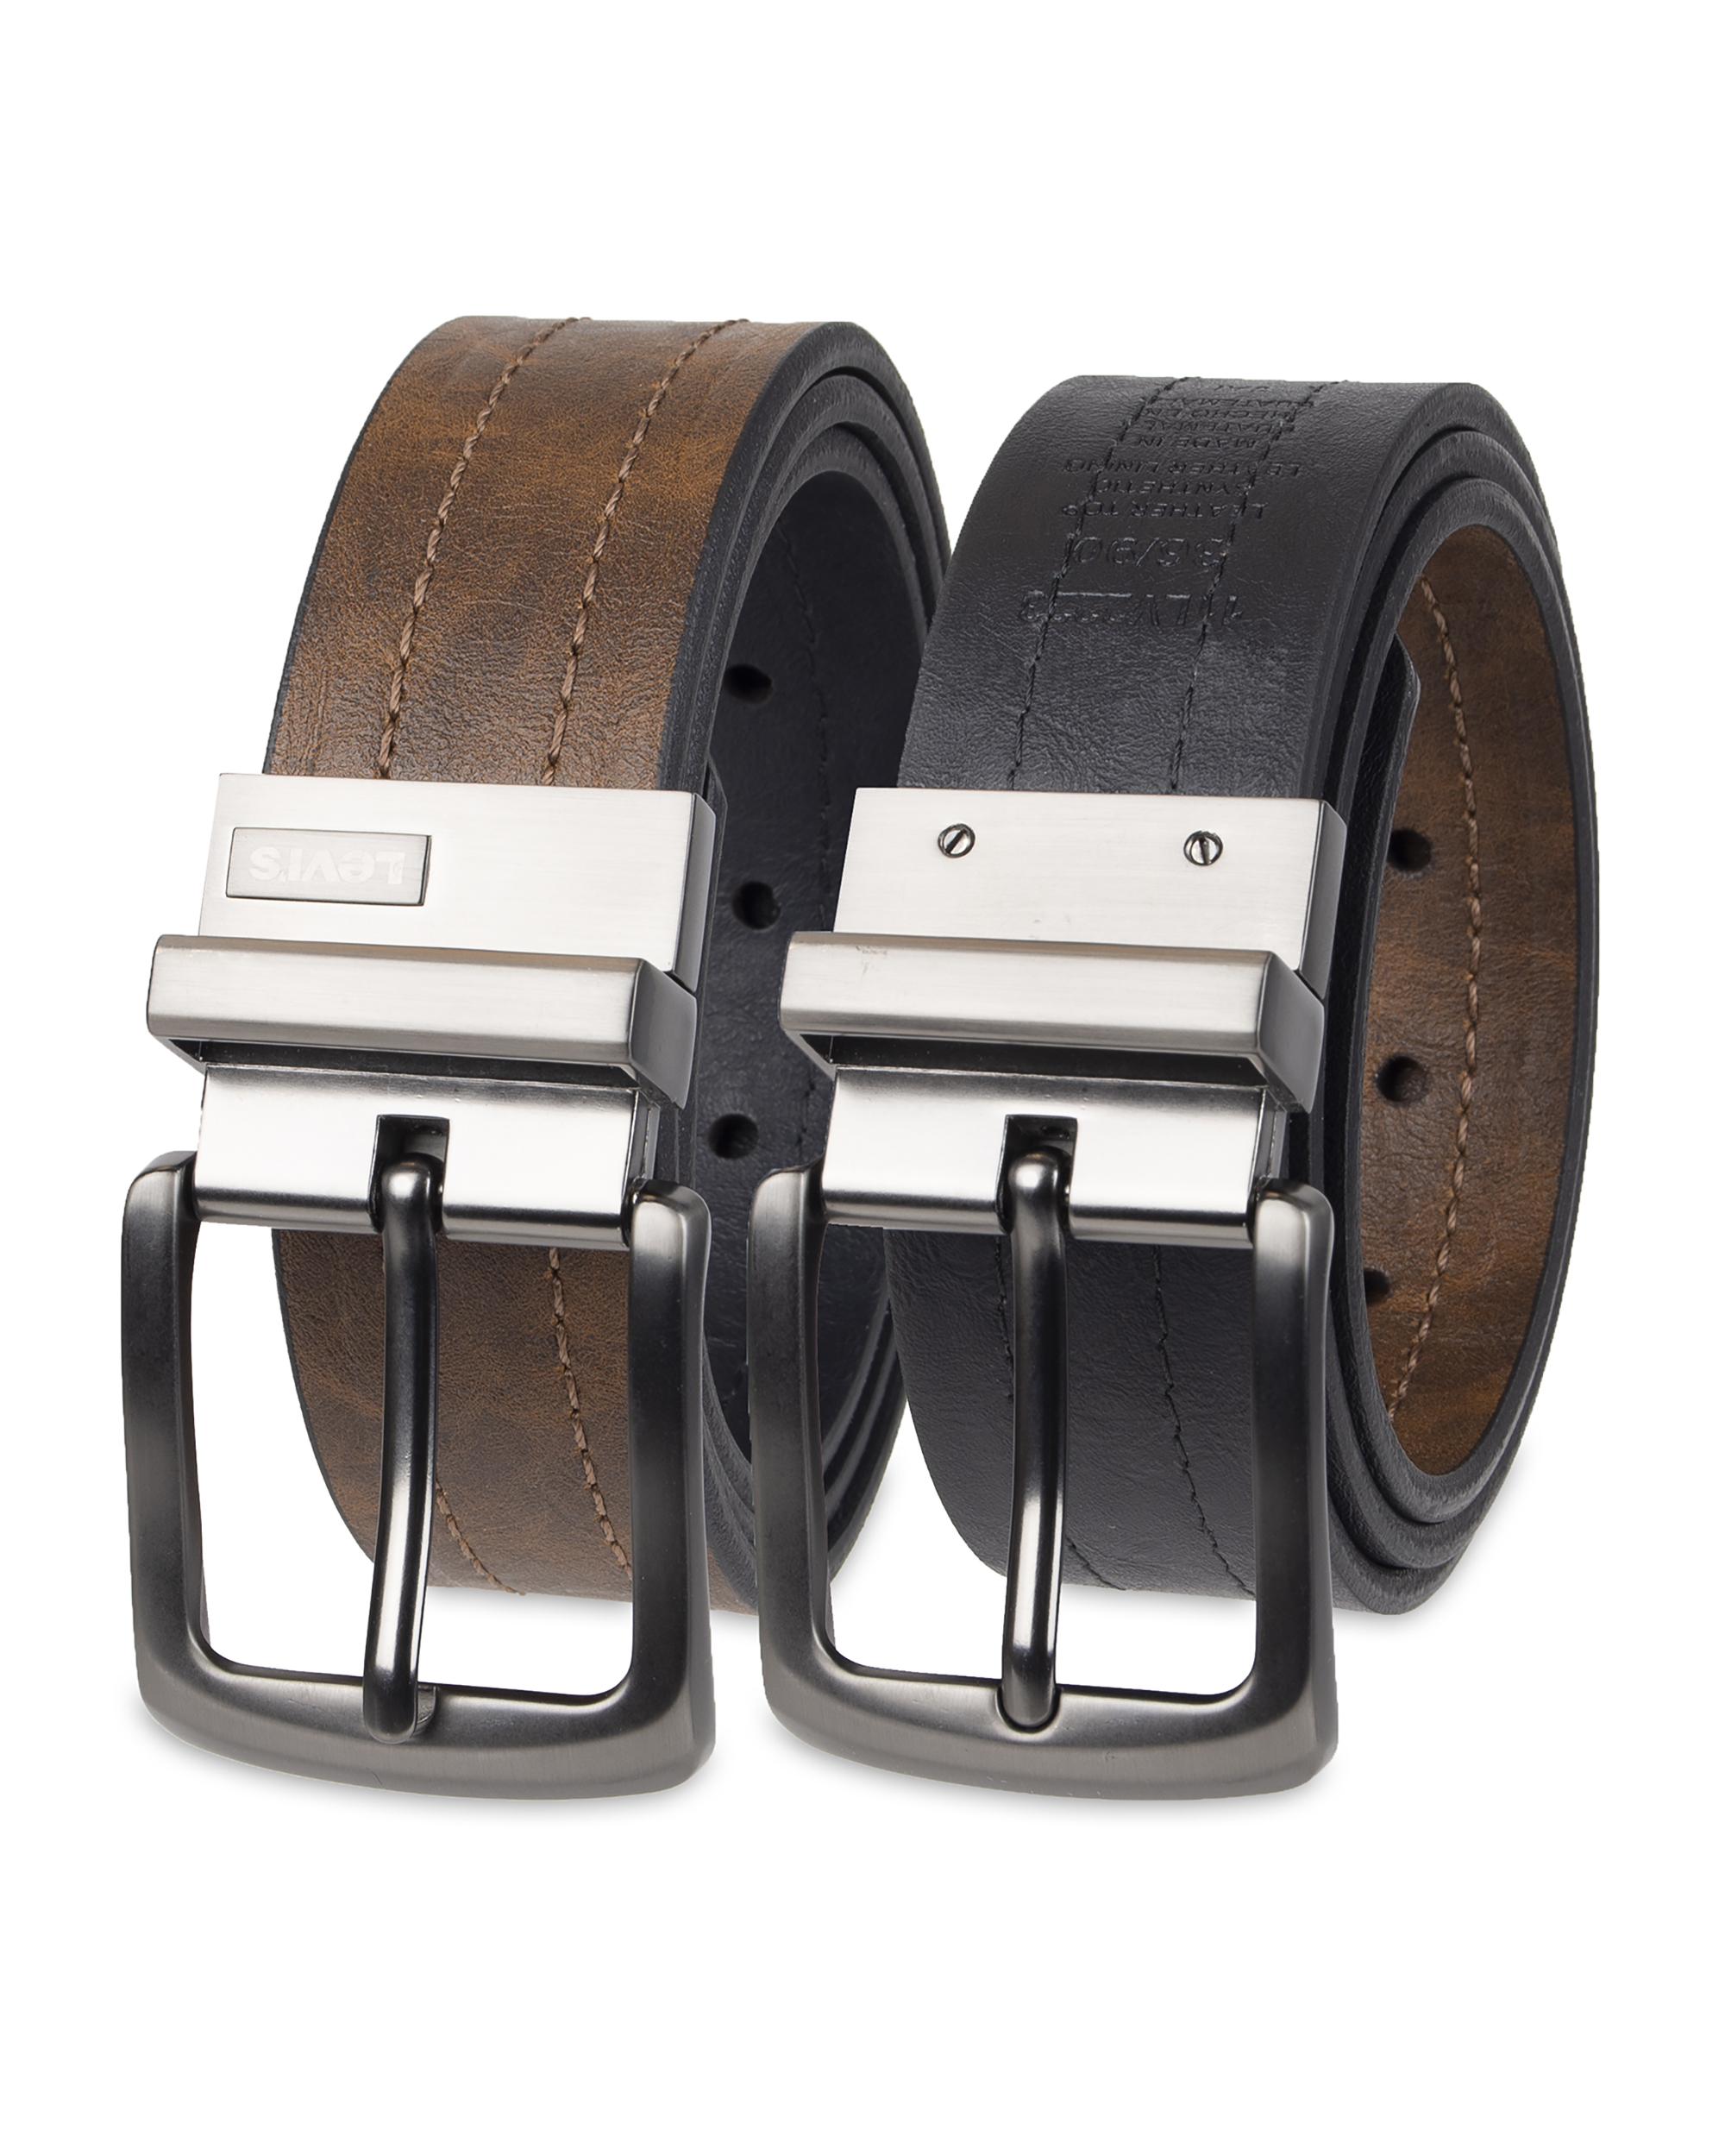 Levi's Men's Two-in-One Reversible Casual Belt, Brown/Black - image 5 of 9